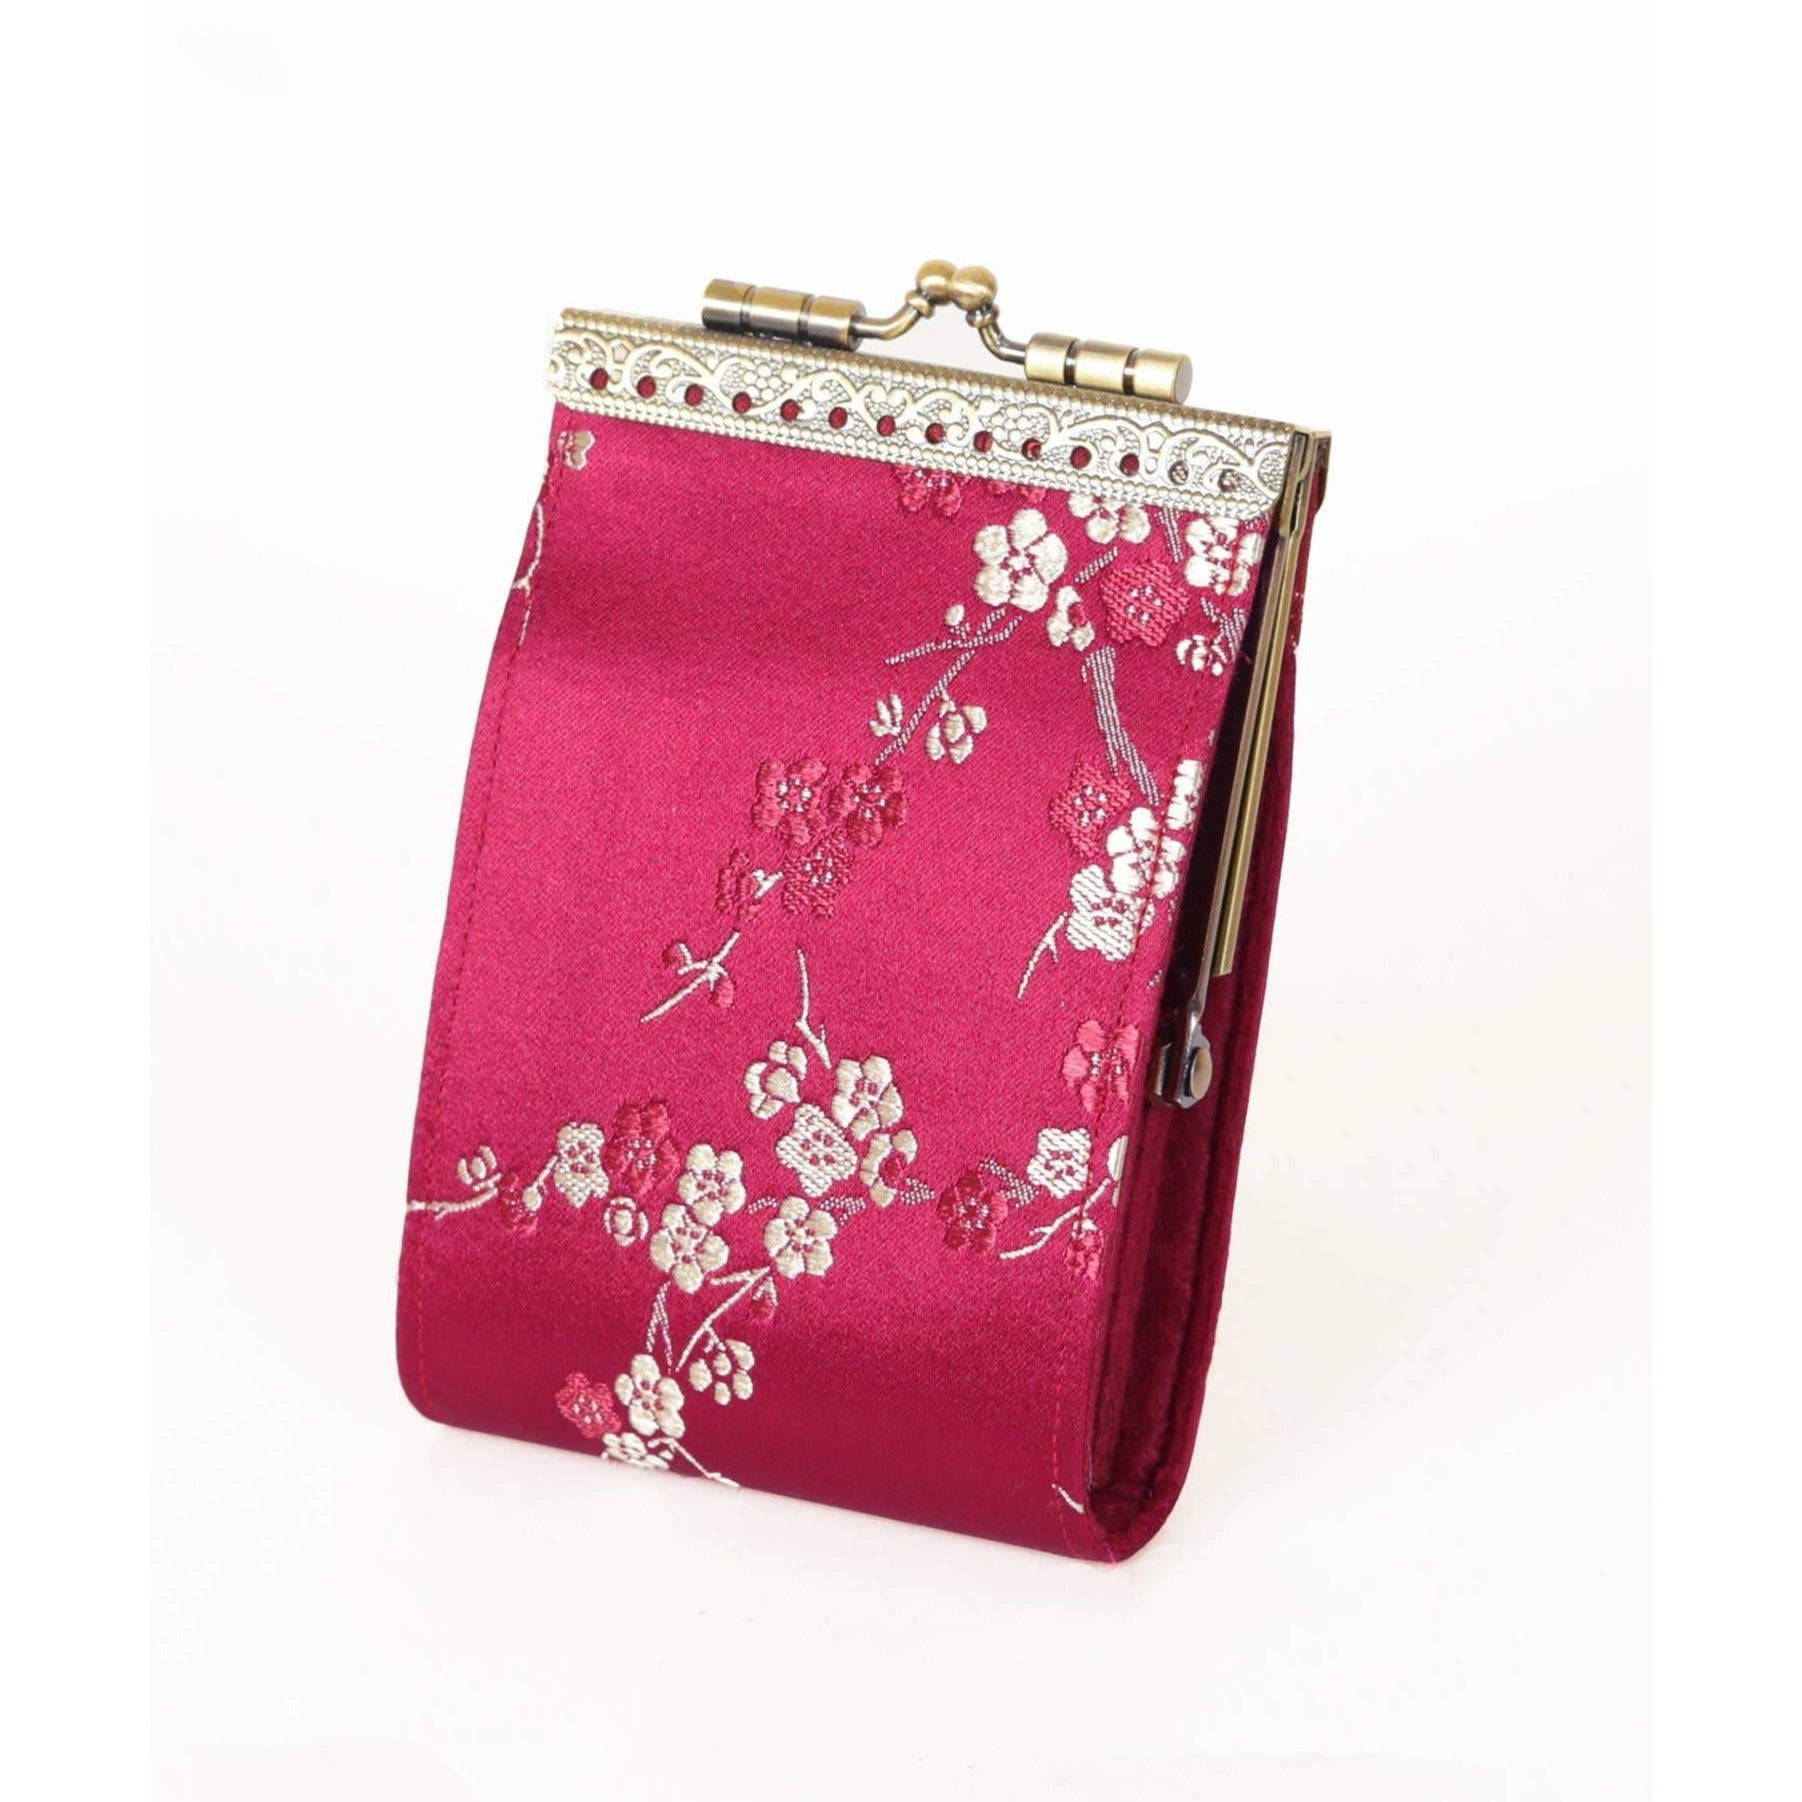 Credit Card Holder in Red Gold Cherry Blossom Brocade | 10 Slots | RFID Blocking